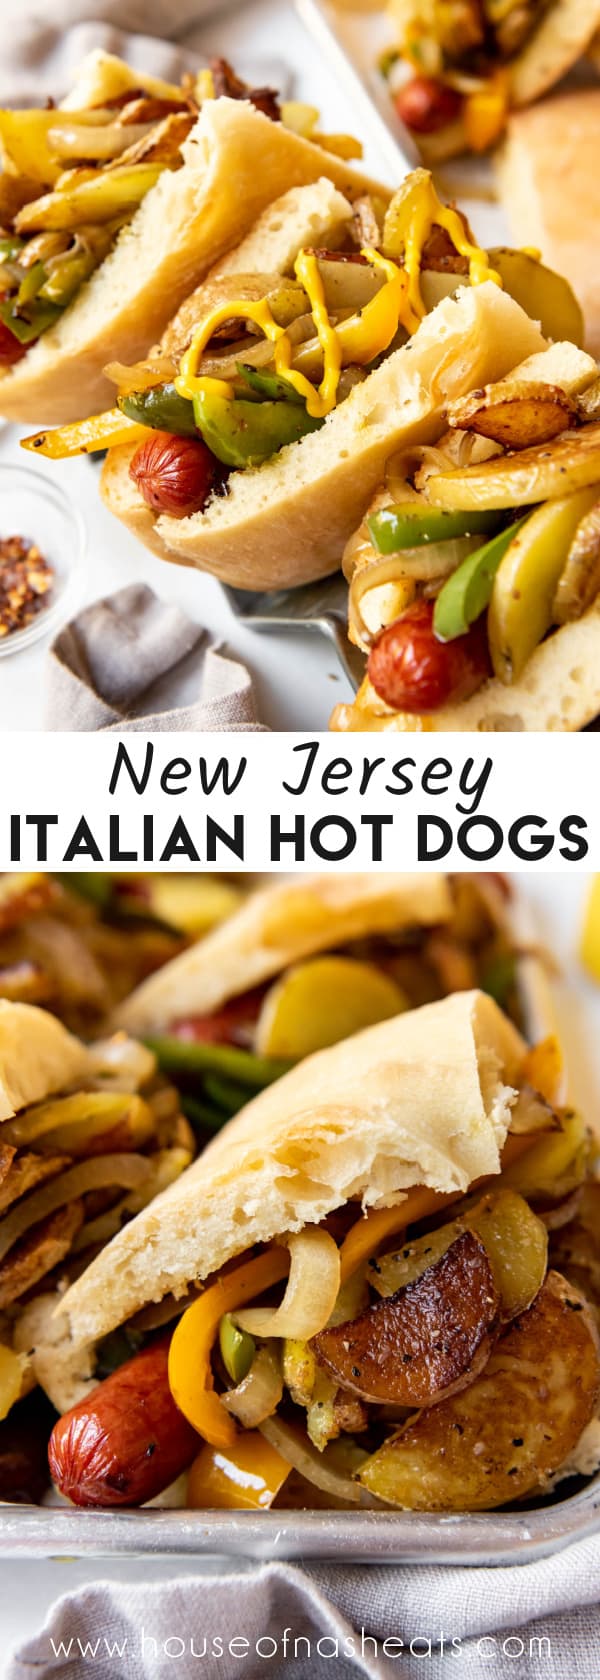 A collage of images of New Jersey Italian hot dogs with text overlay.